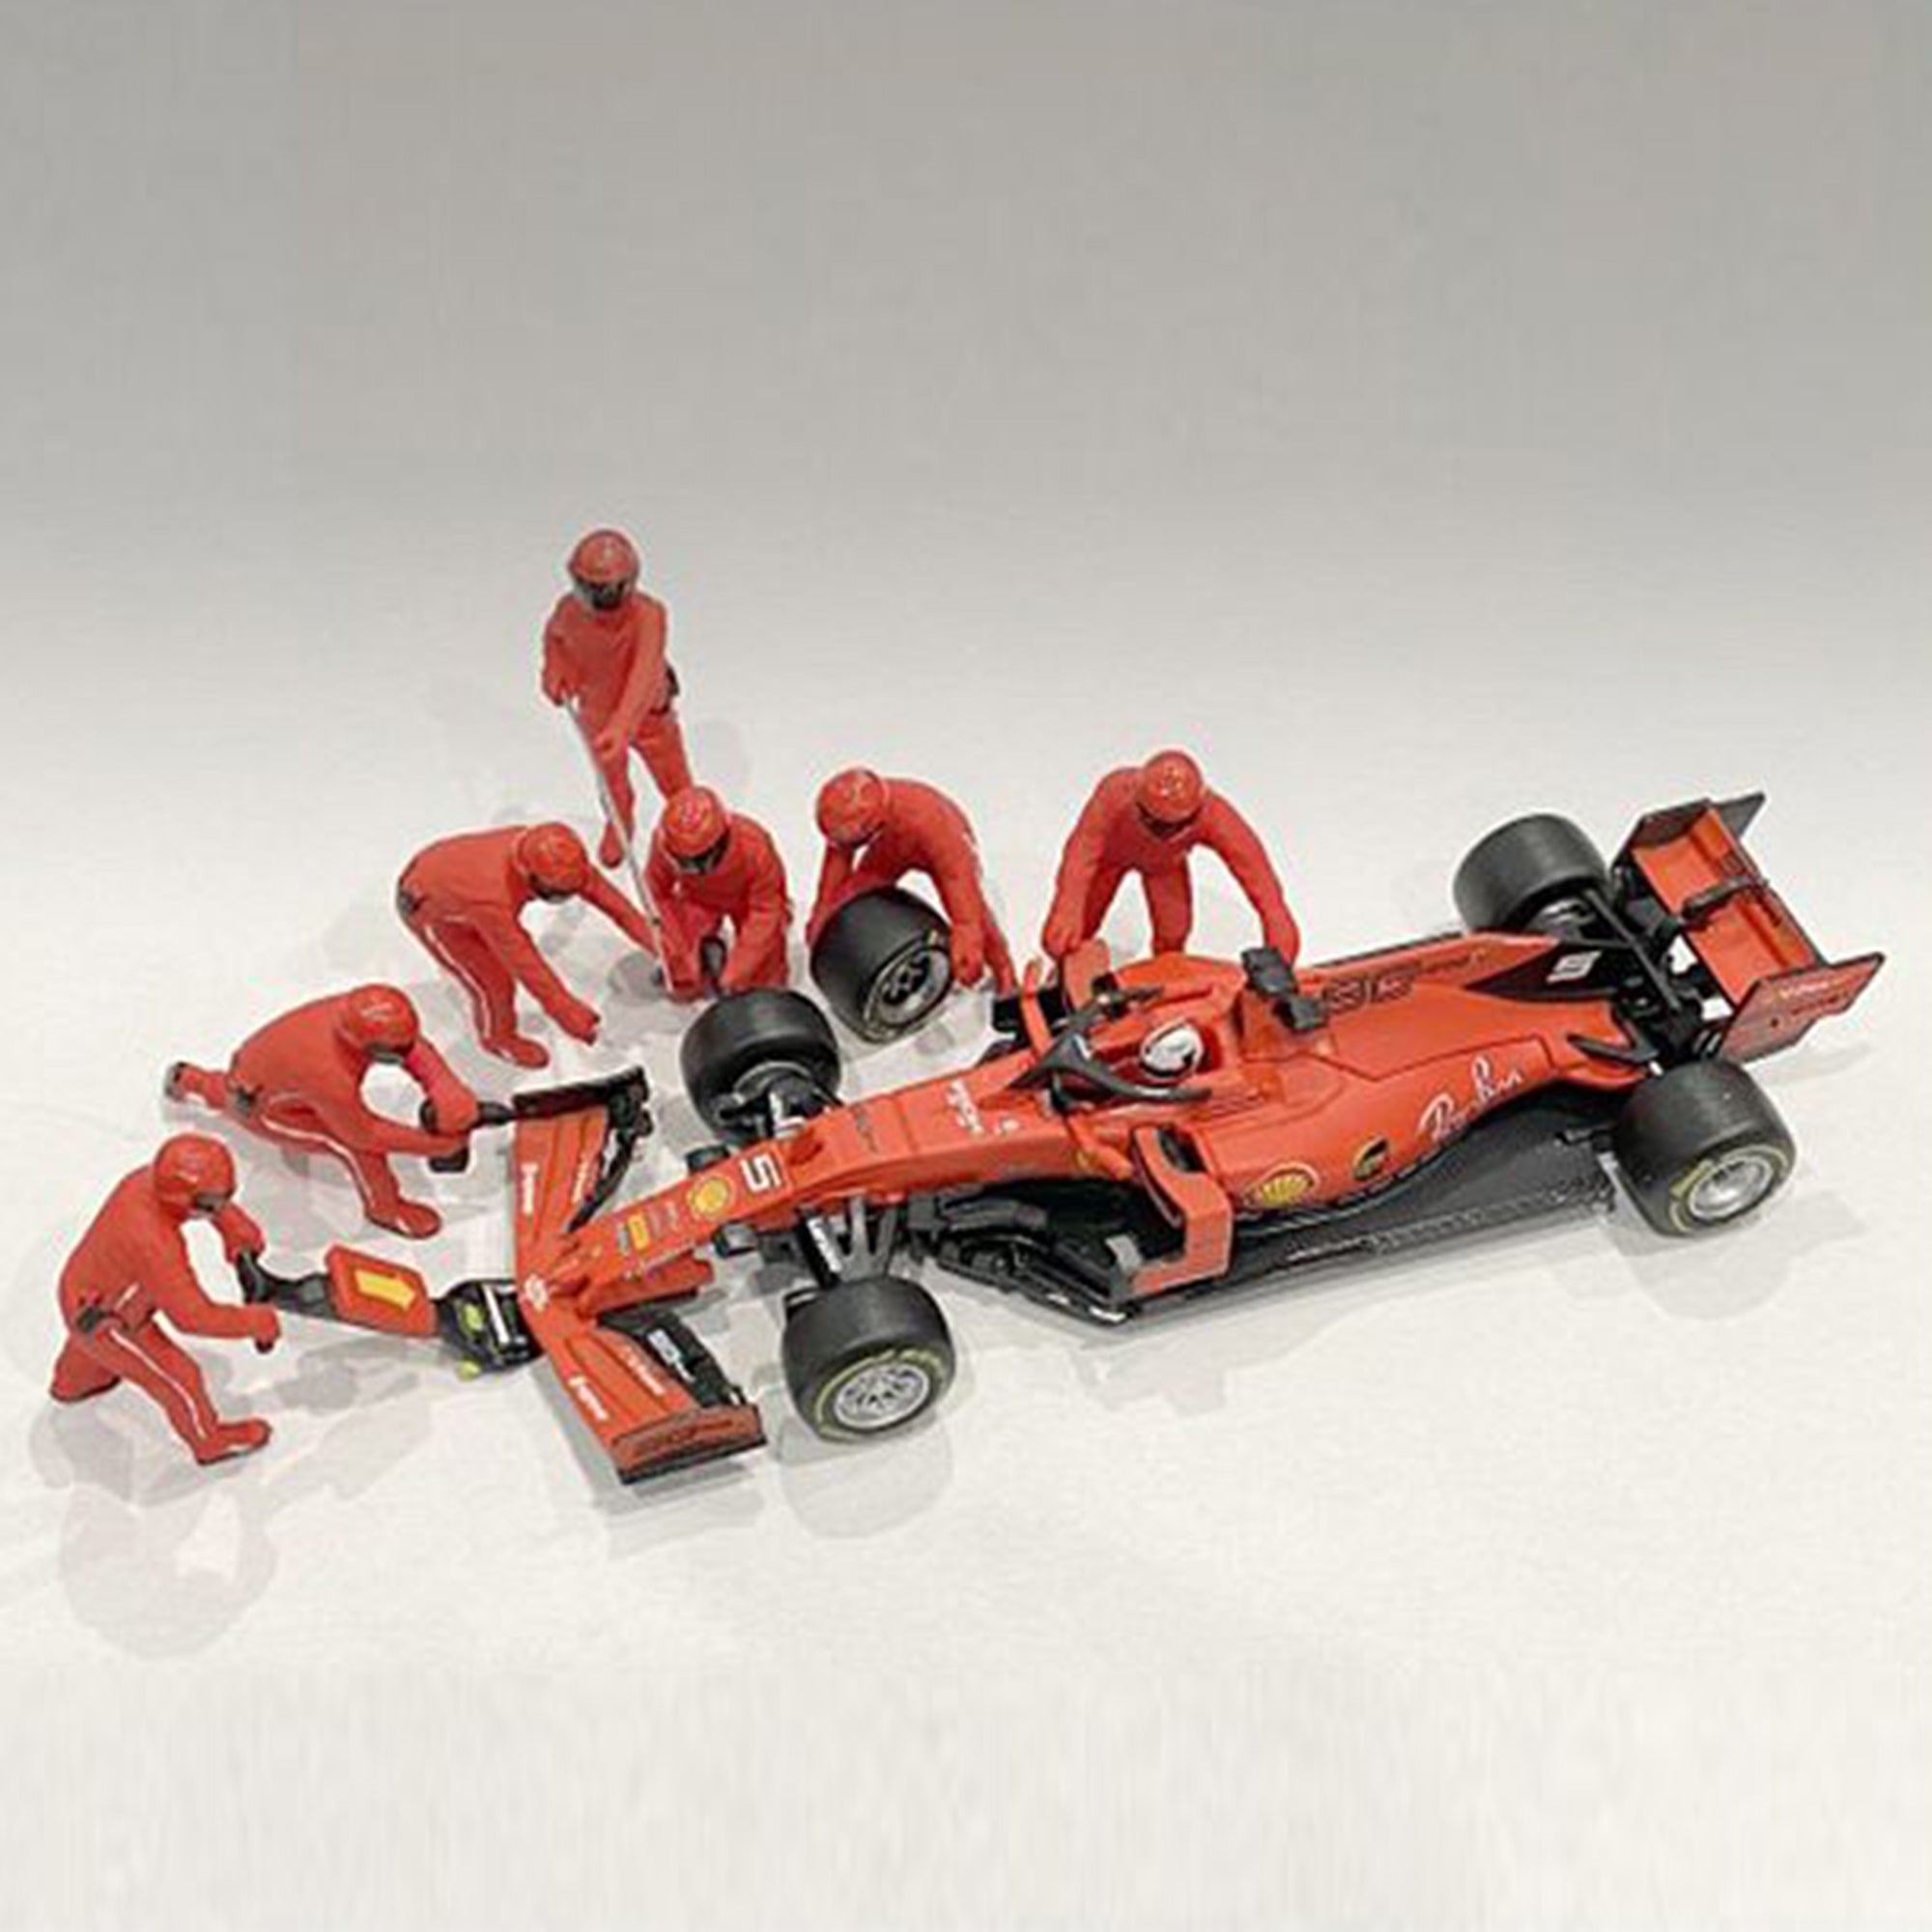 American Dioramas F1 Red Team Pit Crew Figures 1:18 Diecast Model